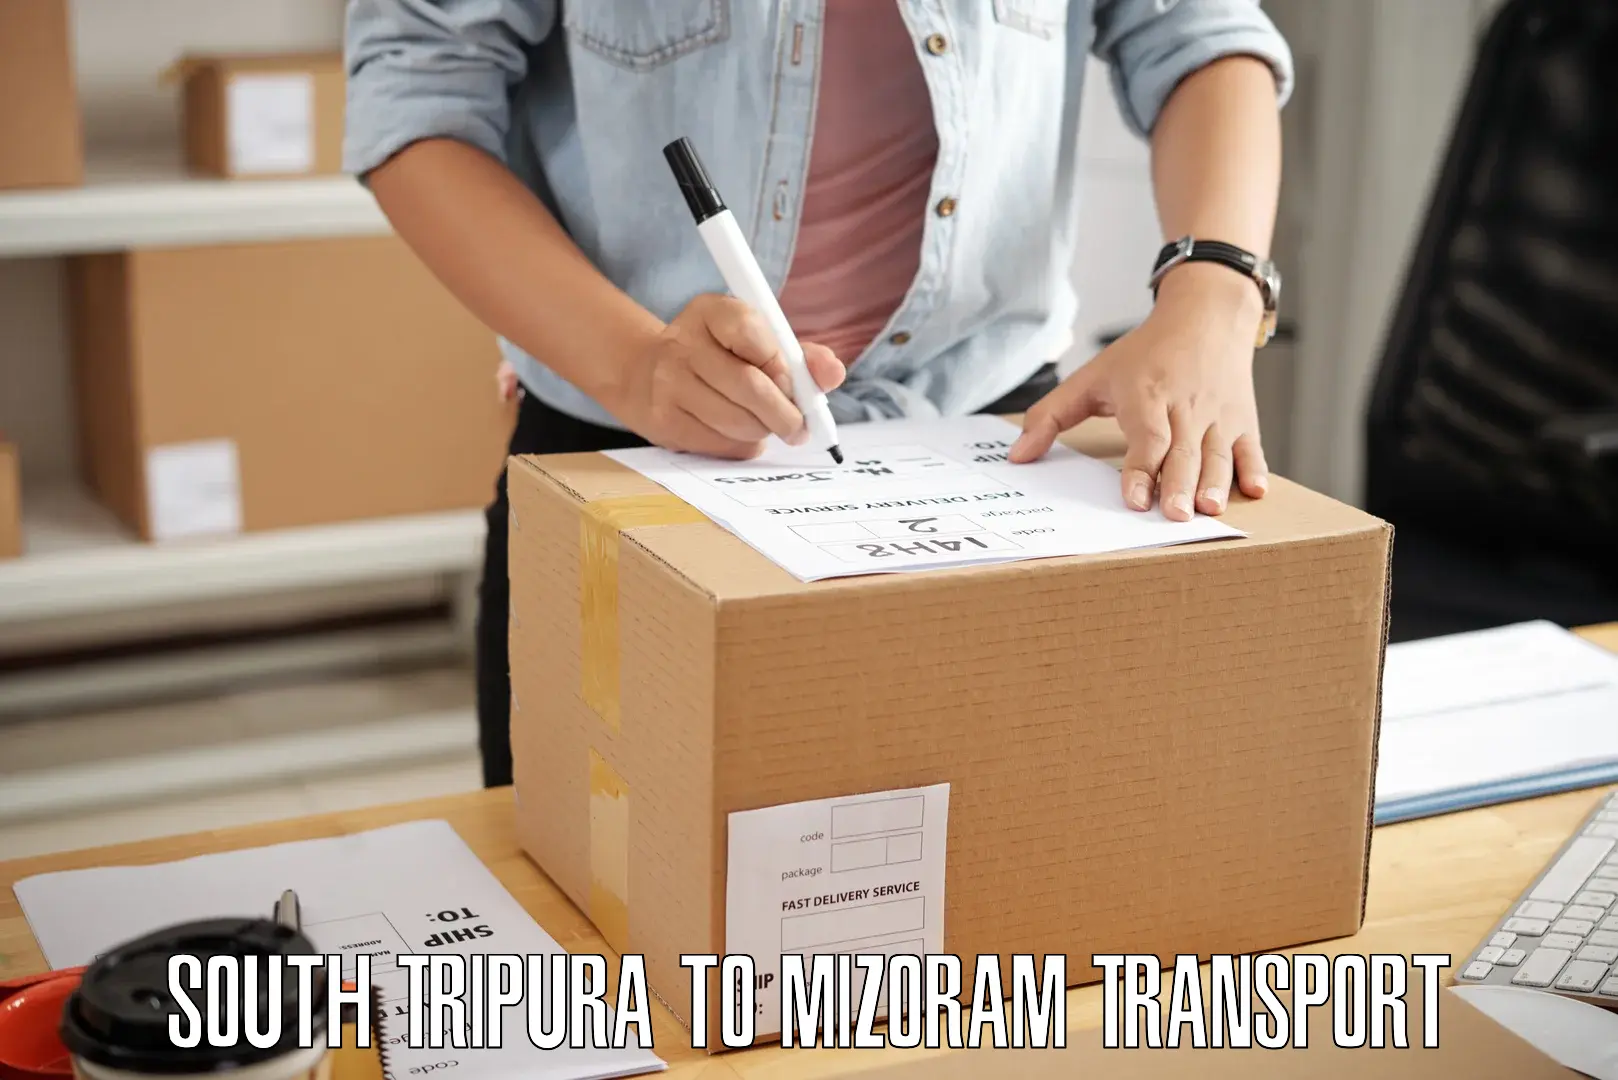 Online transport service South Tripura to Hnahthial